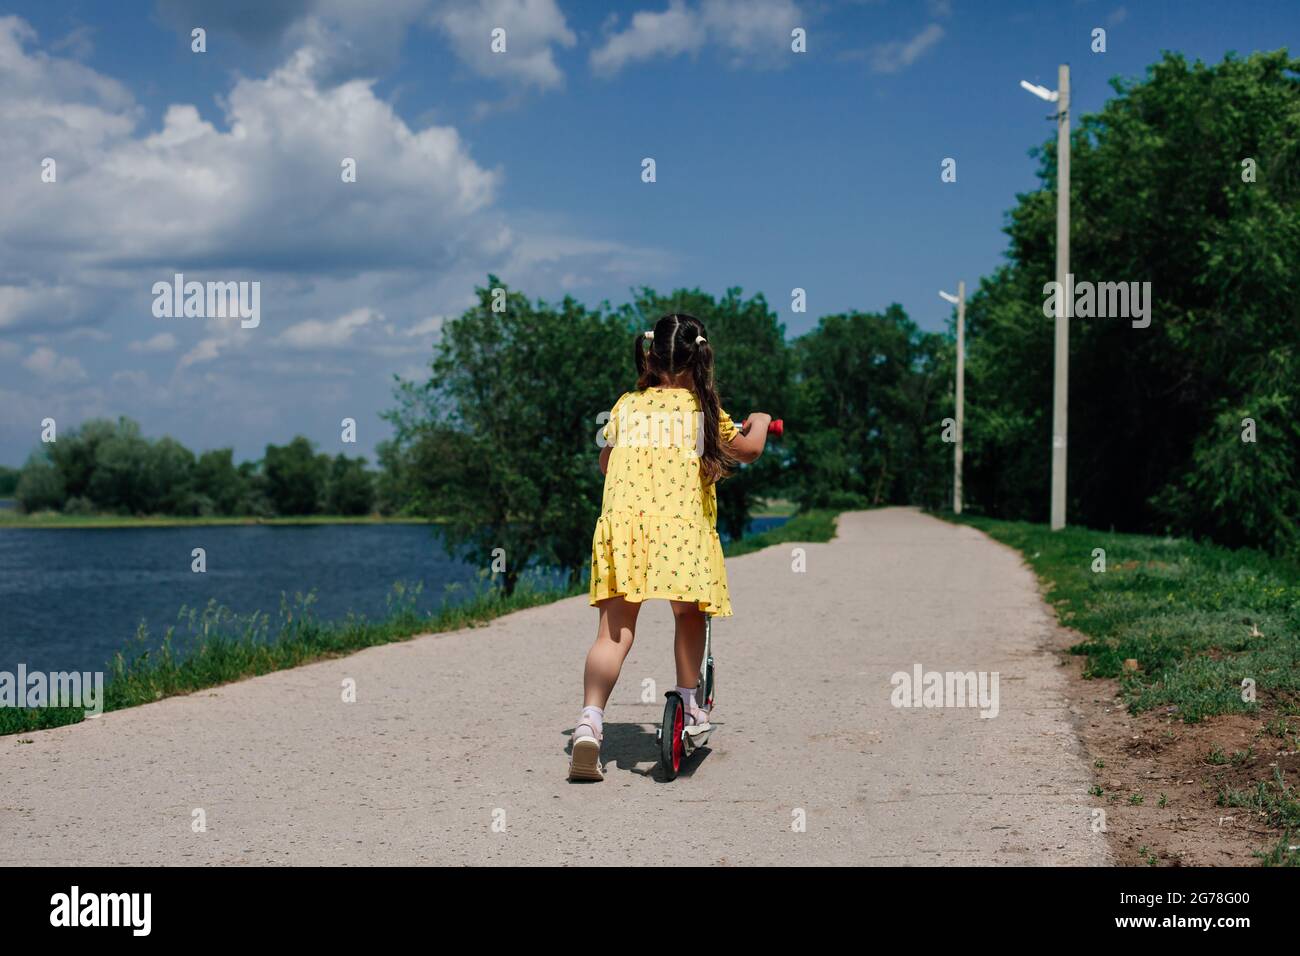 rear view of a girl in a yellow dress, a girl learns to ride a scooter in a natural park near the lake Stock Photo